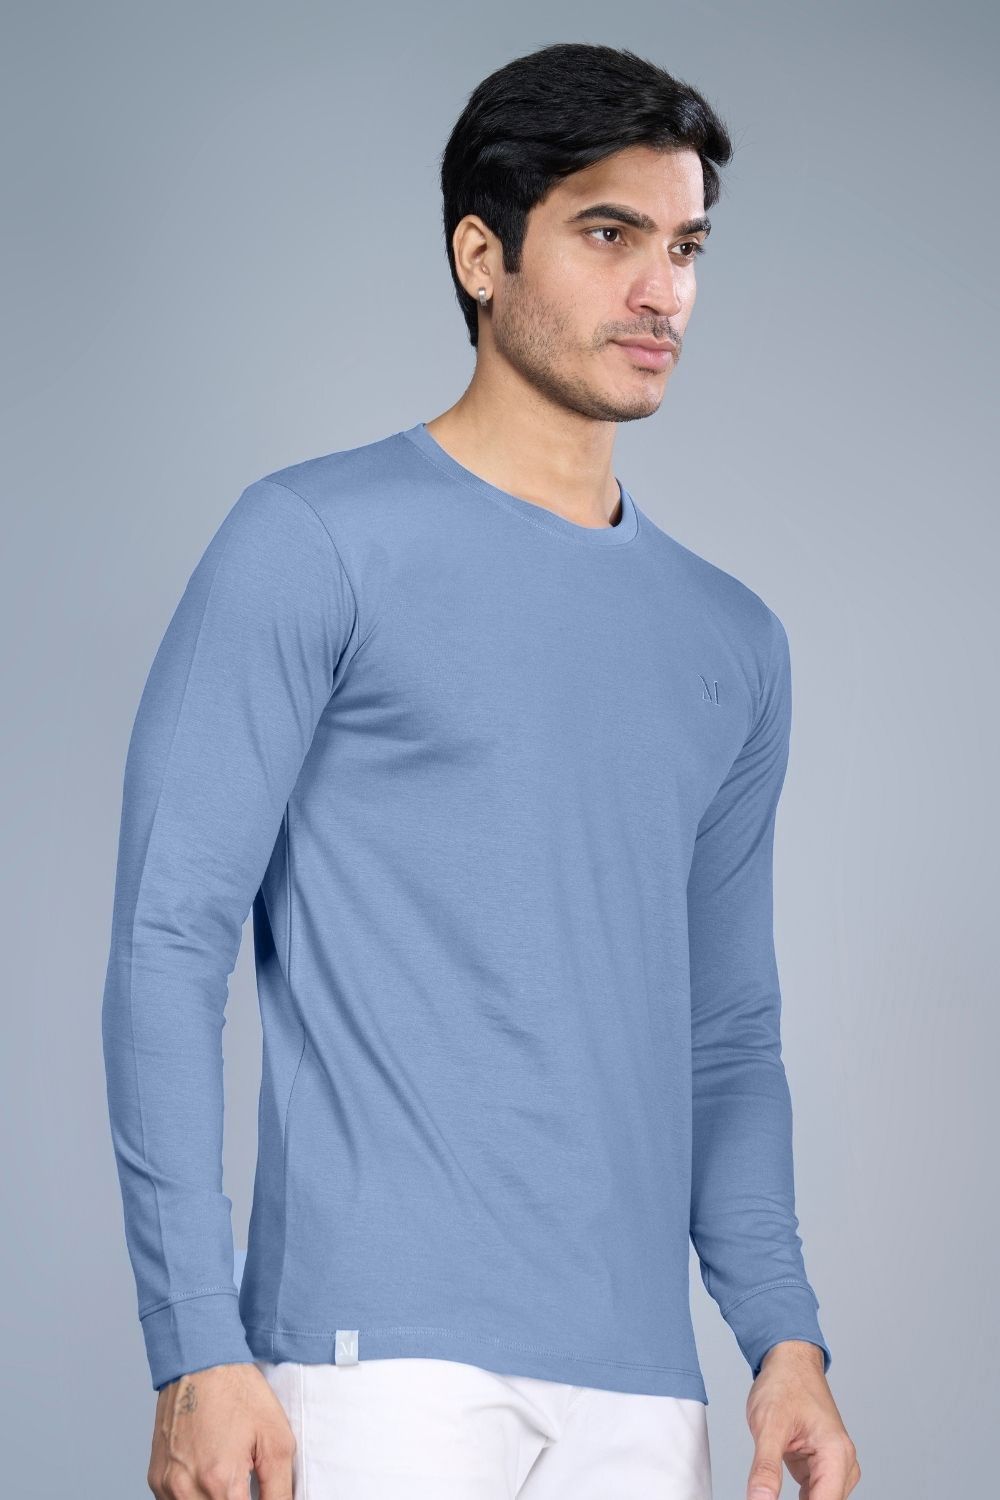 N. L. Blue colored, full sleeve solid T shirt for Men with round neck, side view.